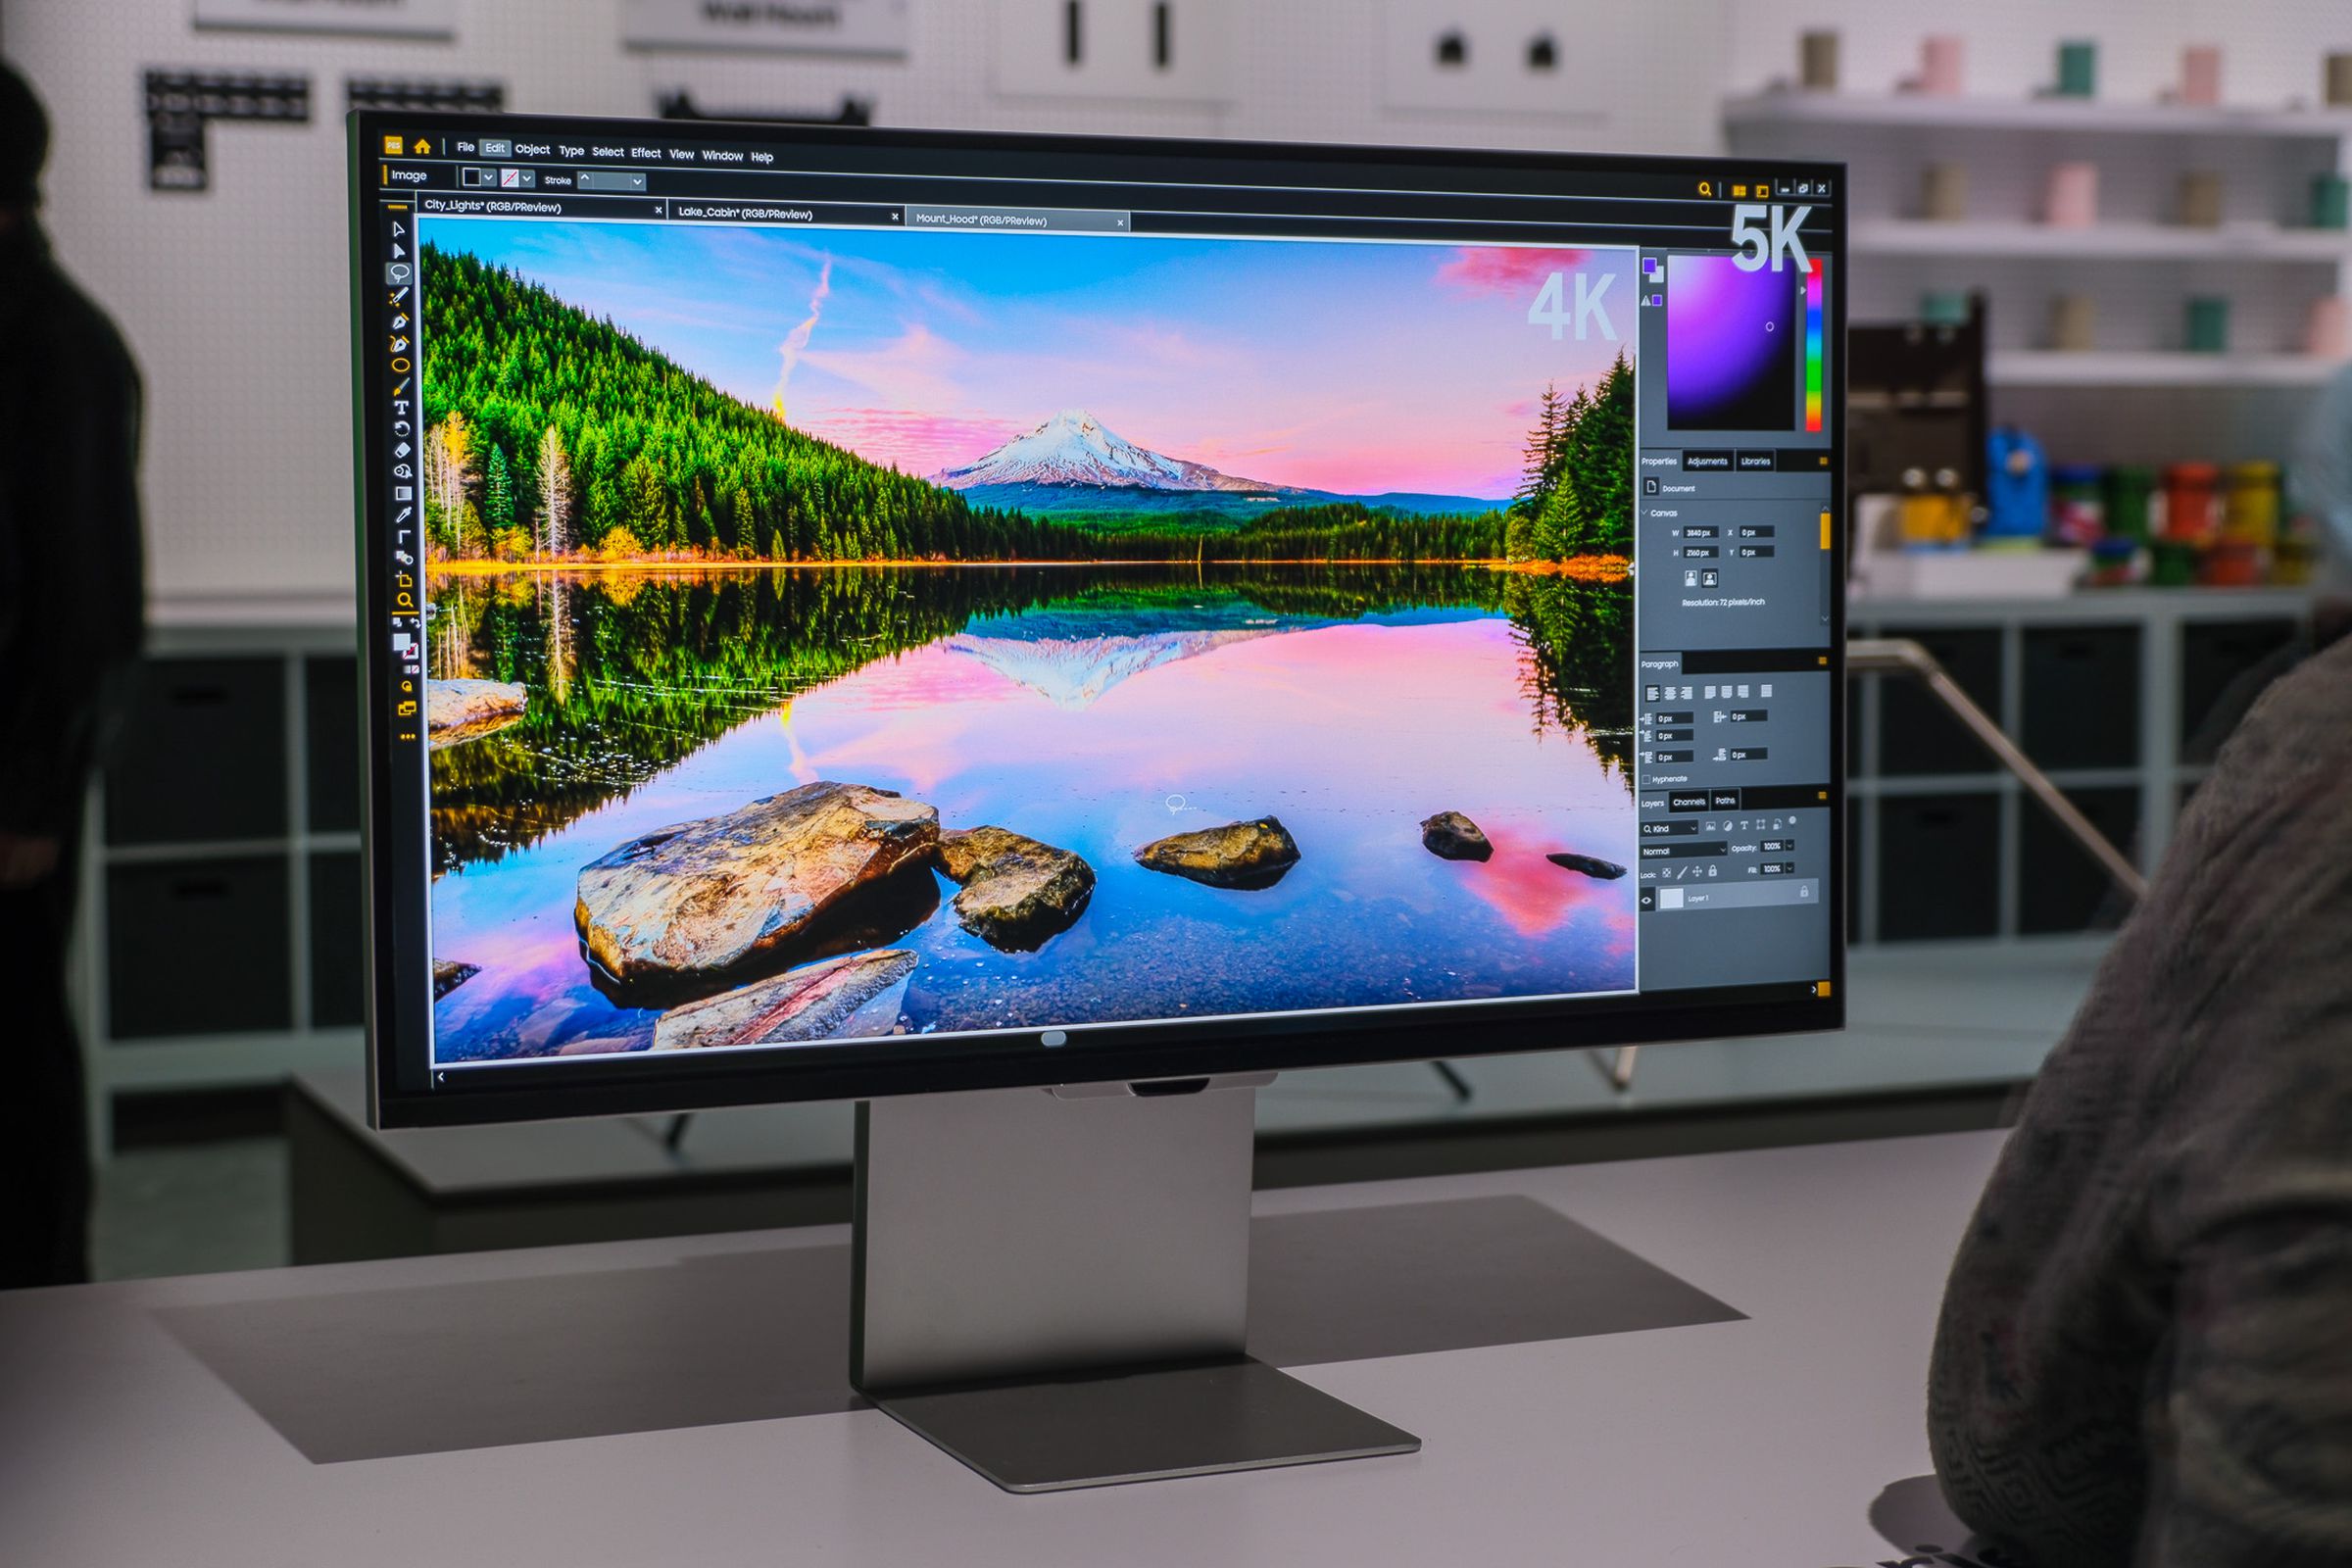 Here's why Samsung and Dell's new monitors are so exciting for Mac